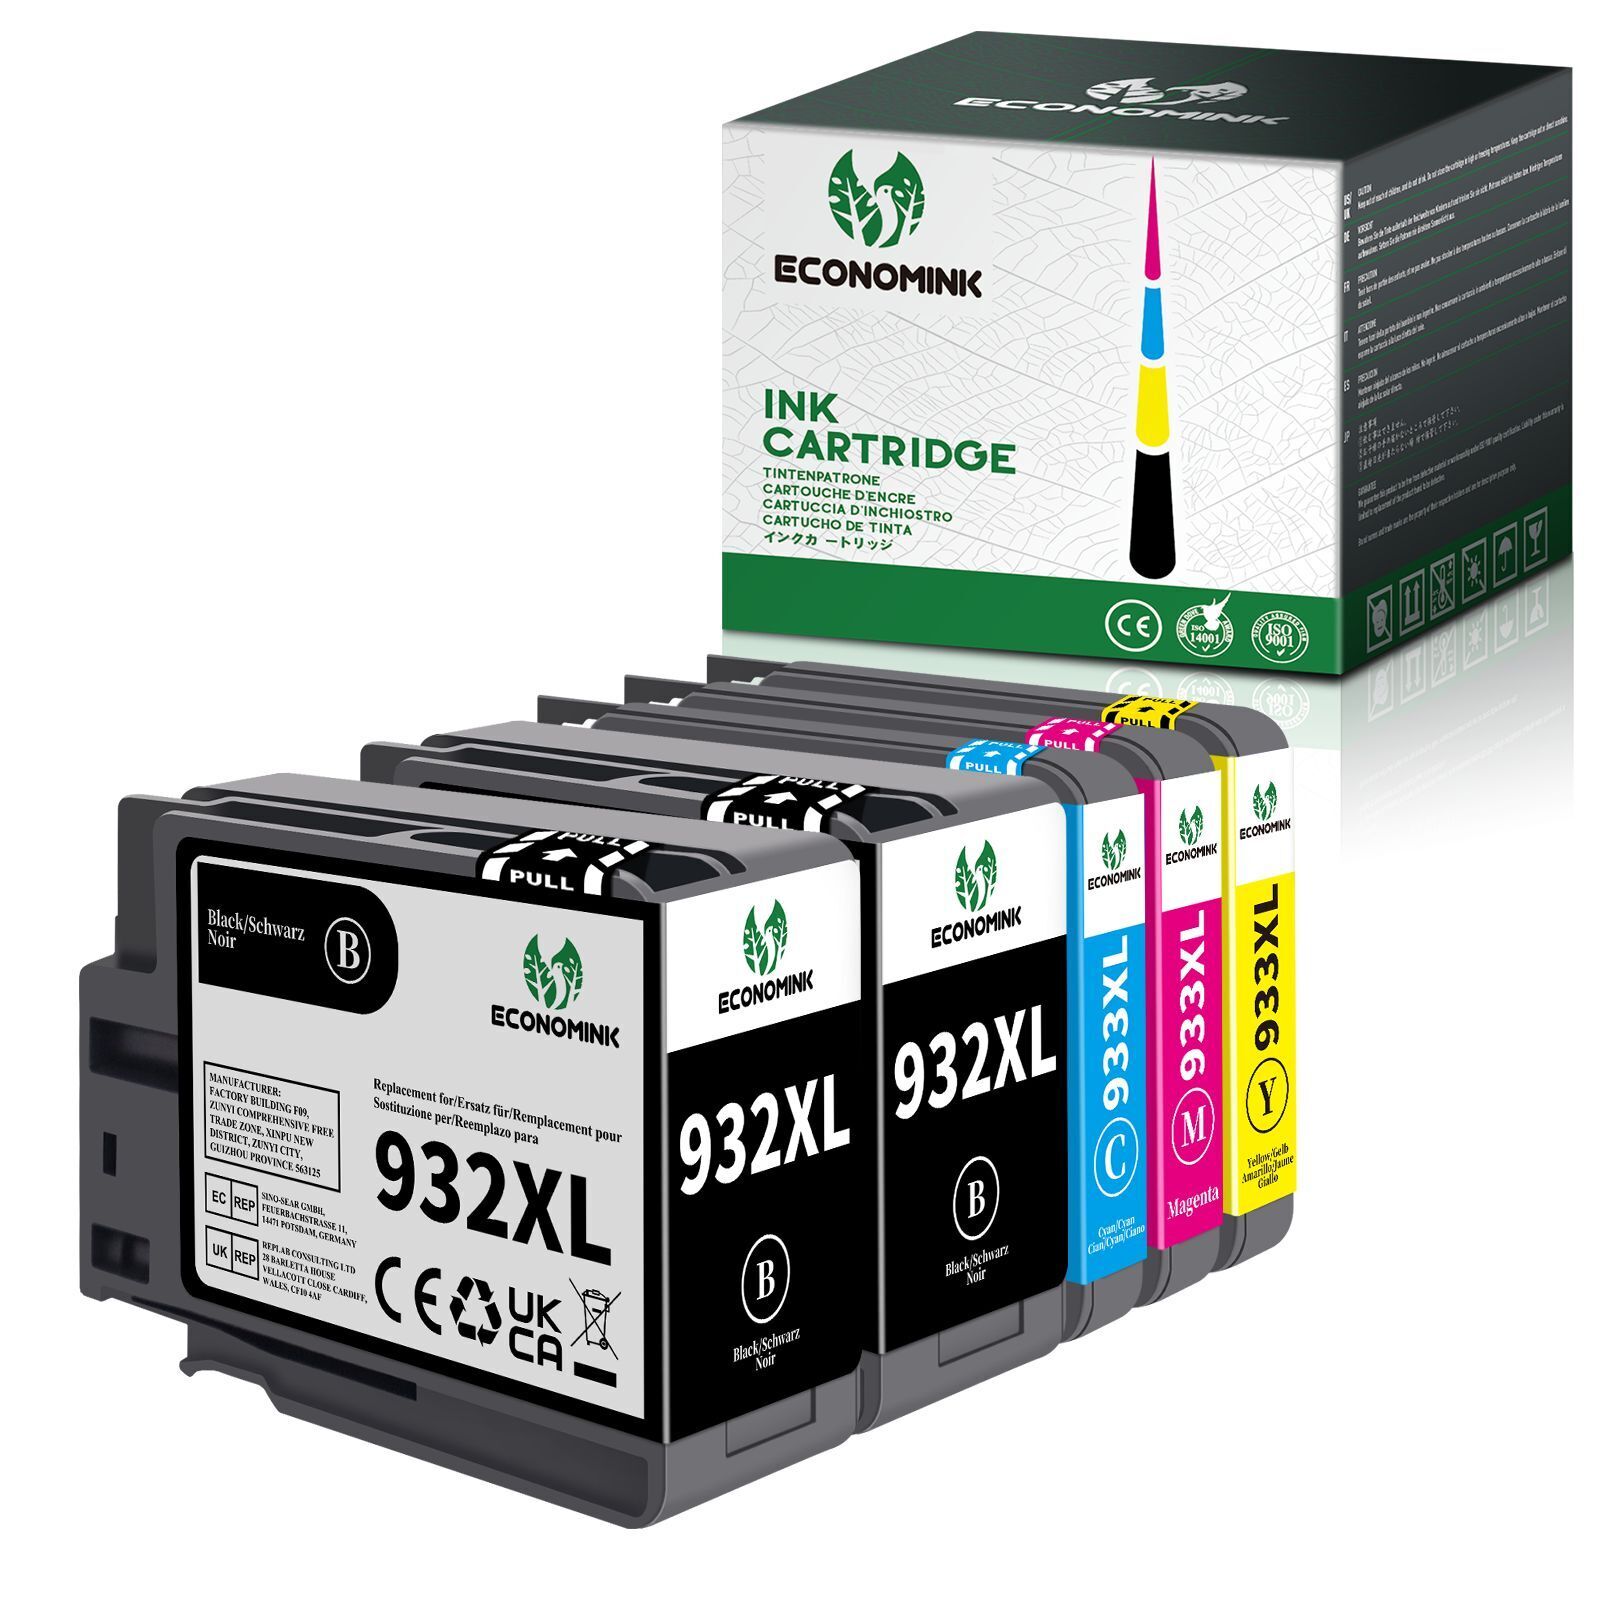 5 Pack 932XL 933XL Ink Cartridge for HP Officejet 6100 6700 6600 7610 7100 7510